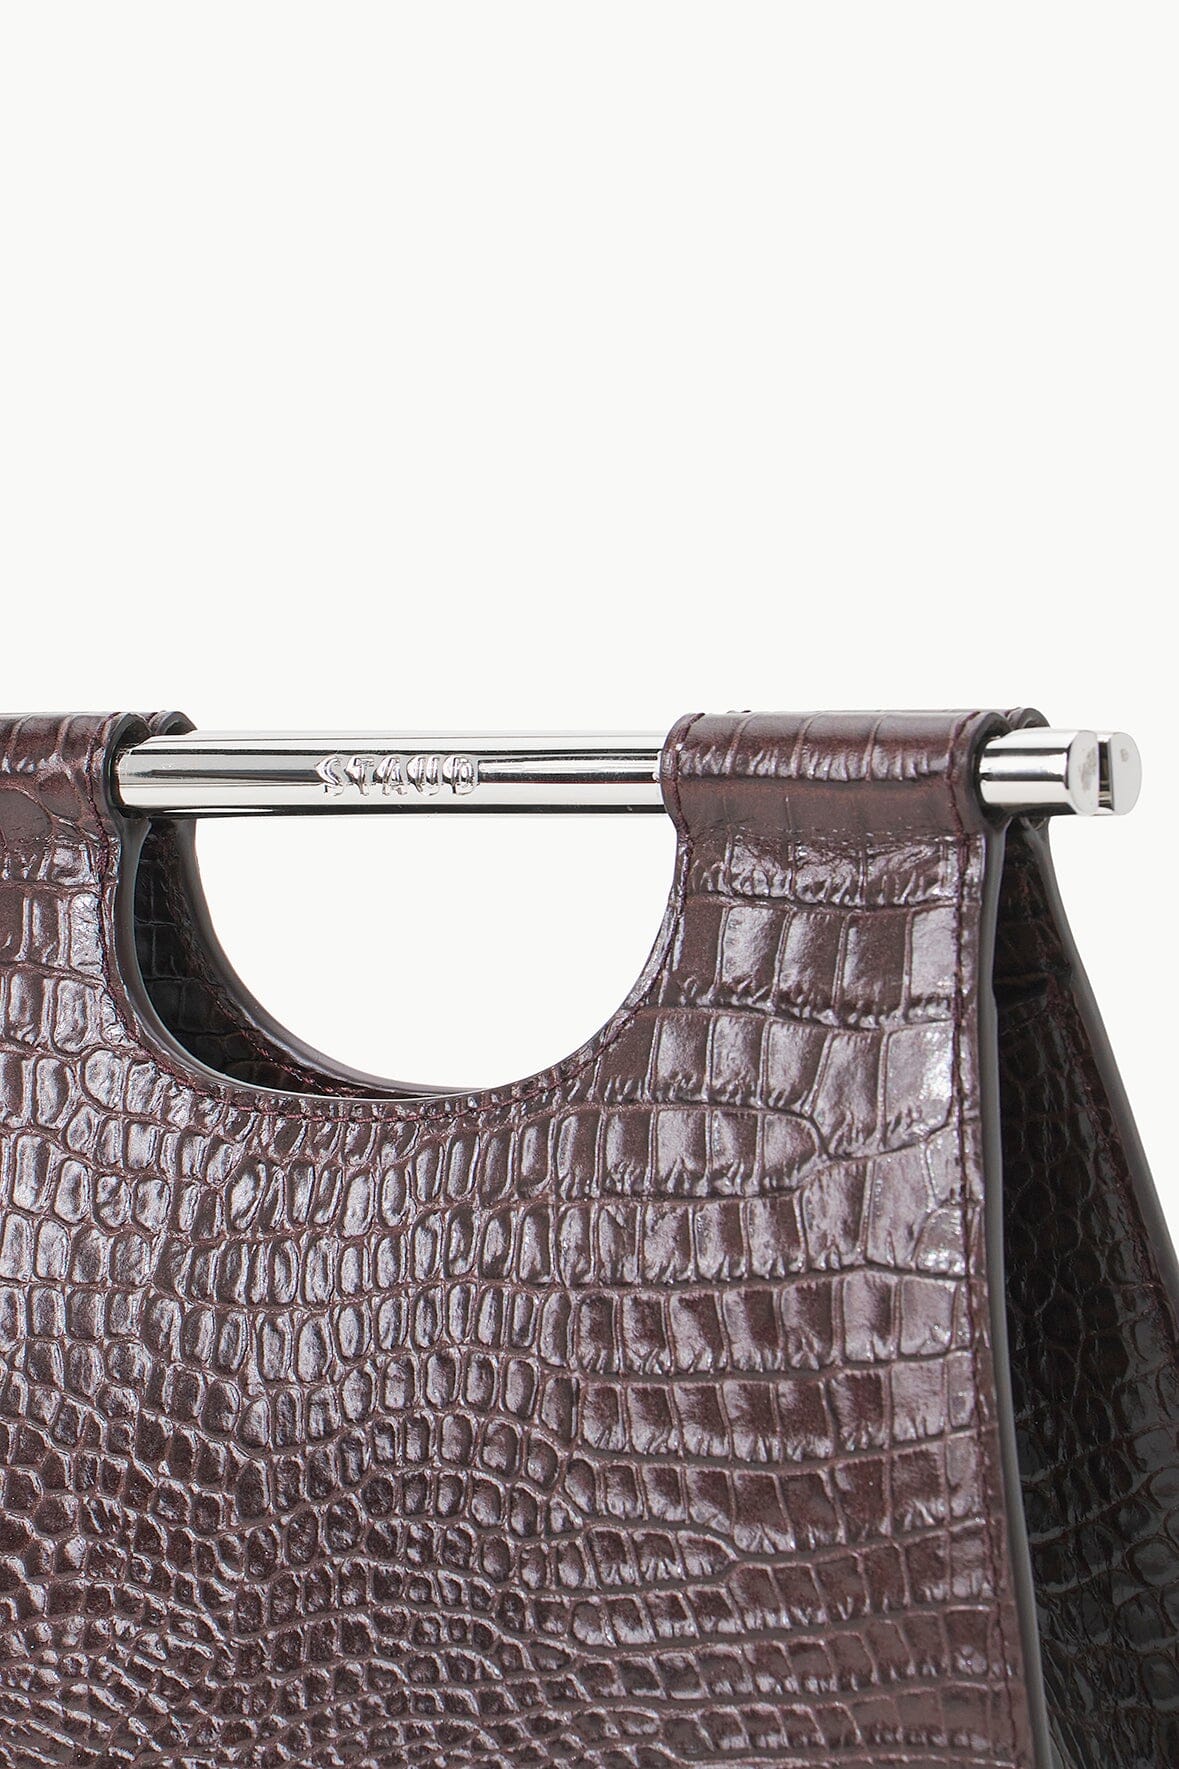 STAUD, Mini Shirley Leather Bag for Female in Walnut Ostrich Embossed